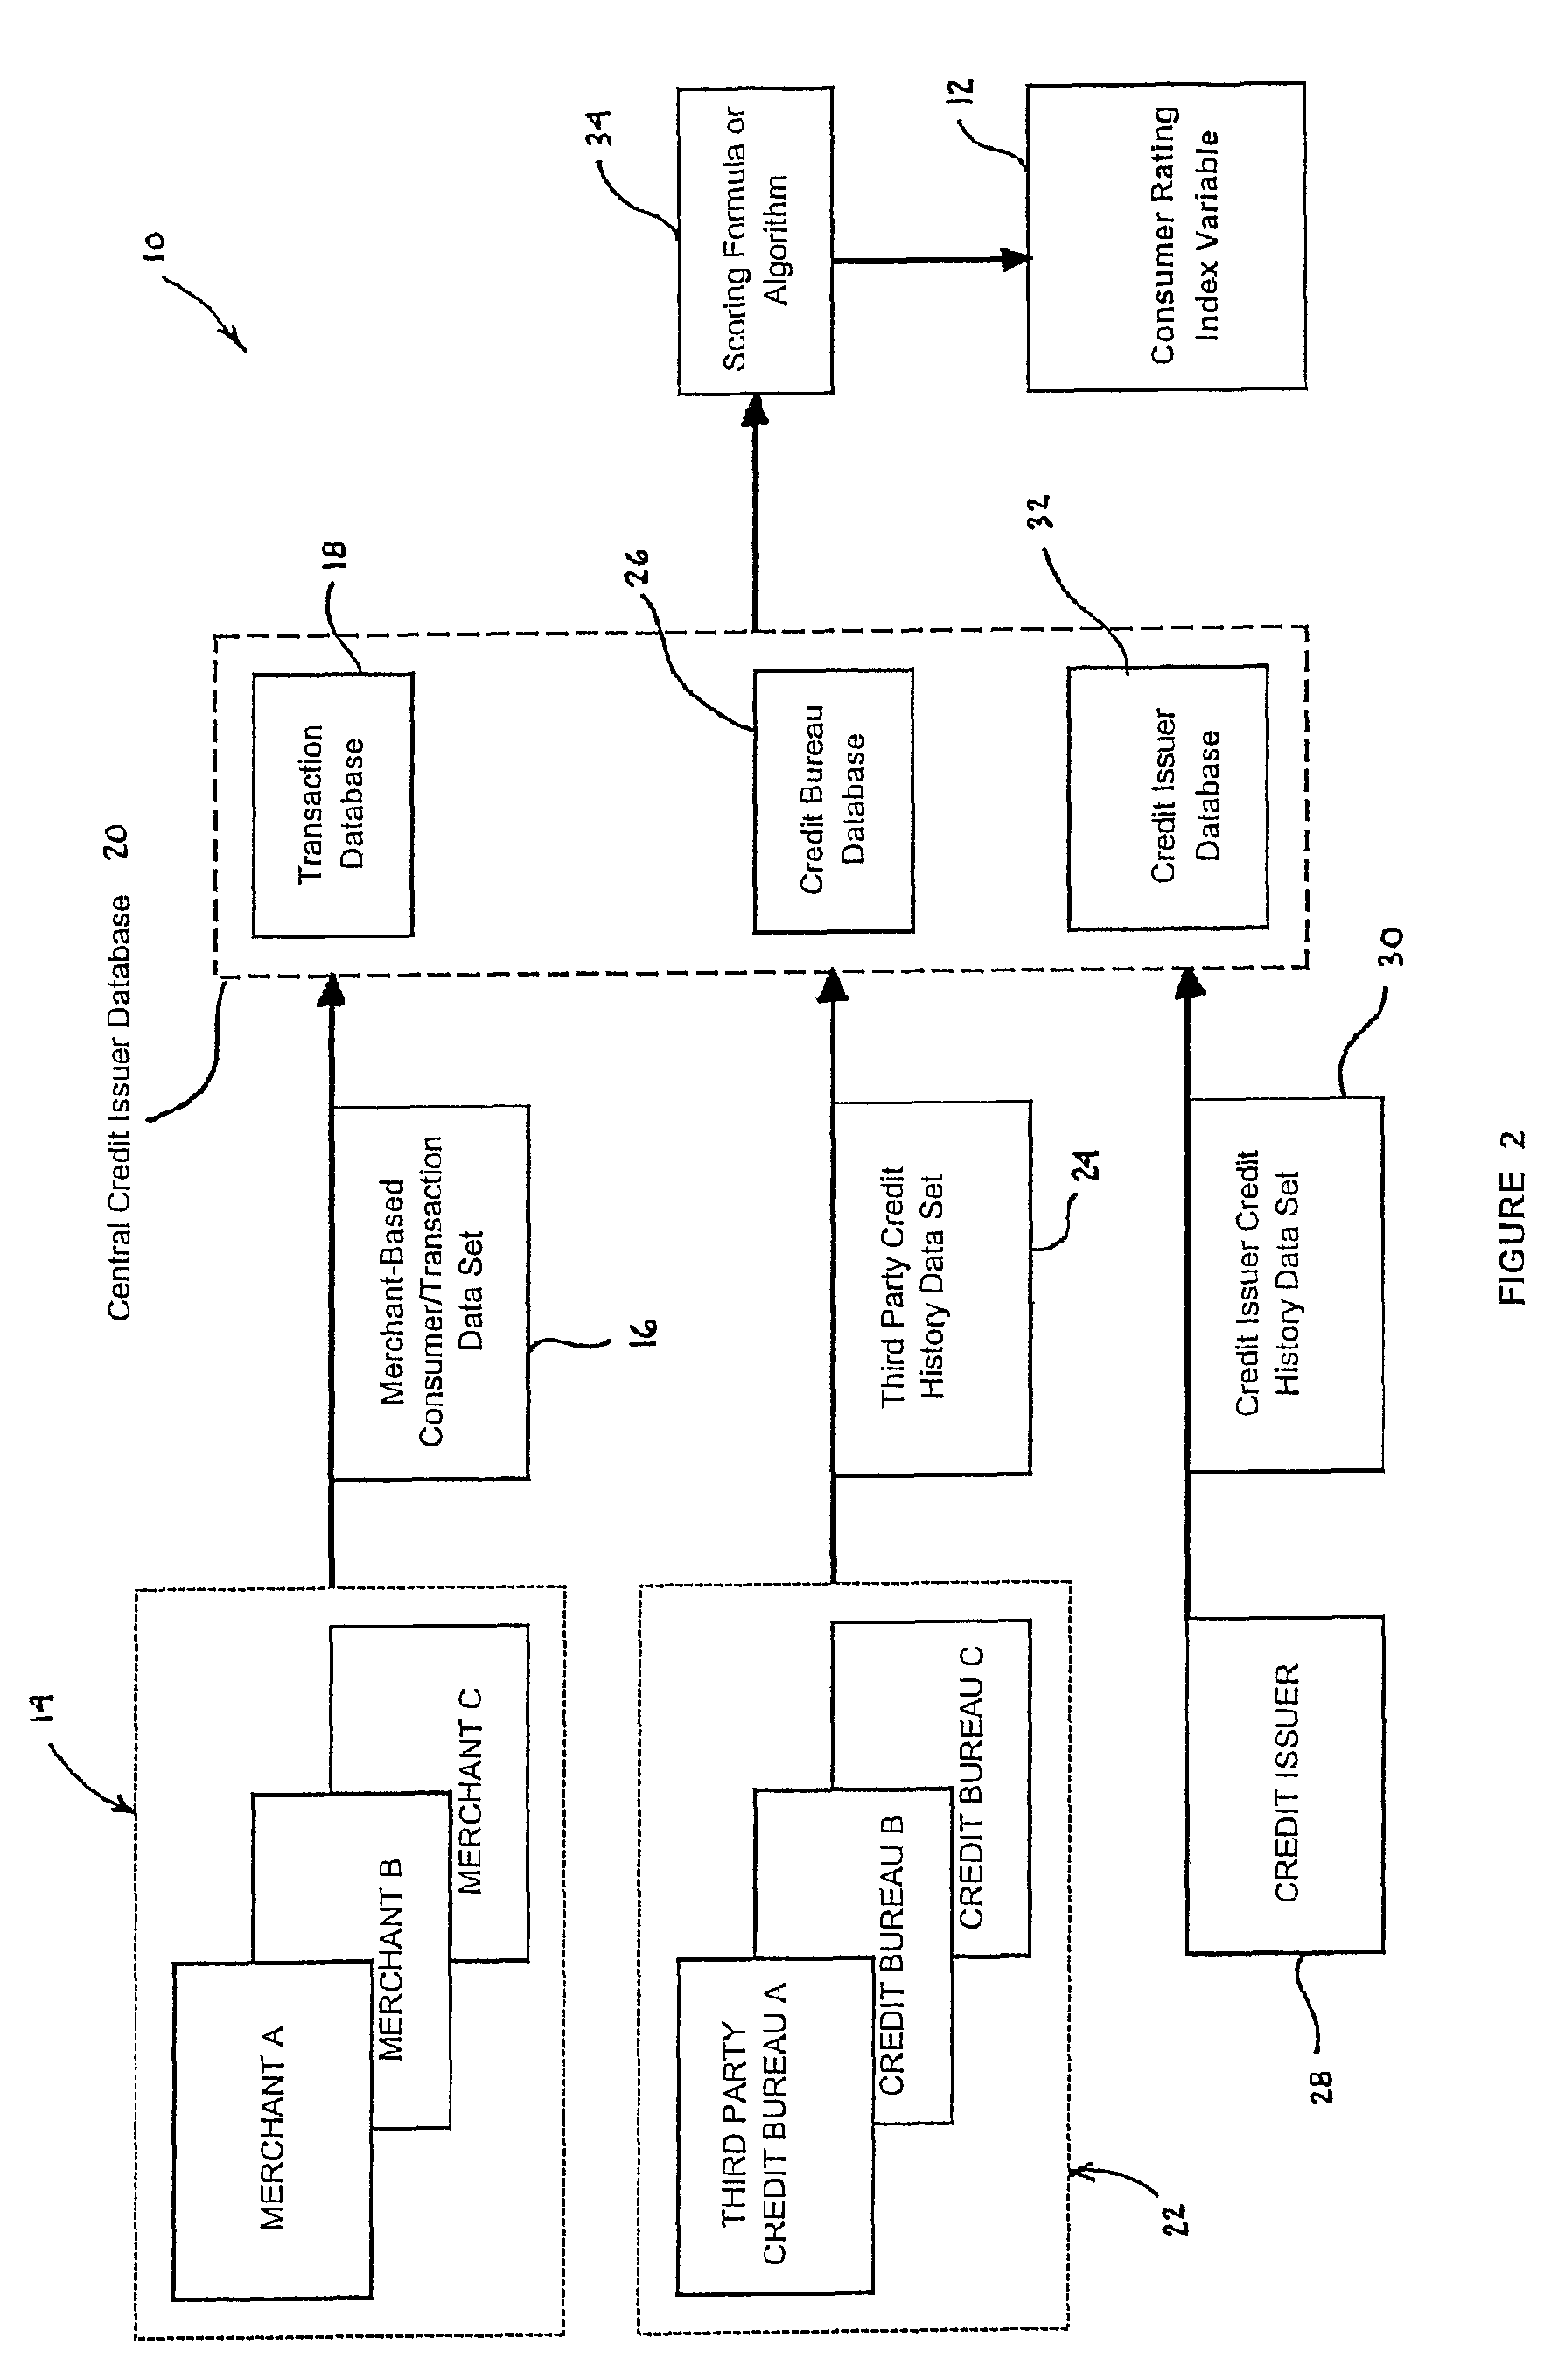 Computer-implemented method and system for dynamic consumer rating in a transaction